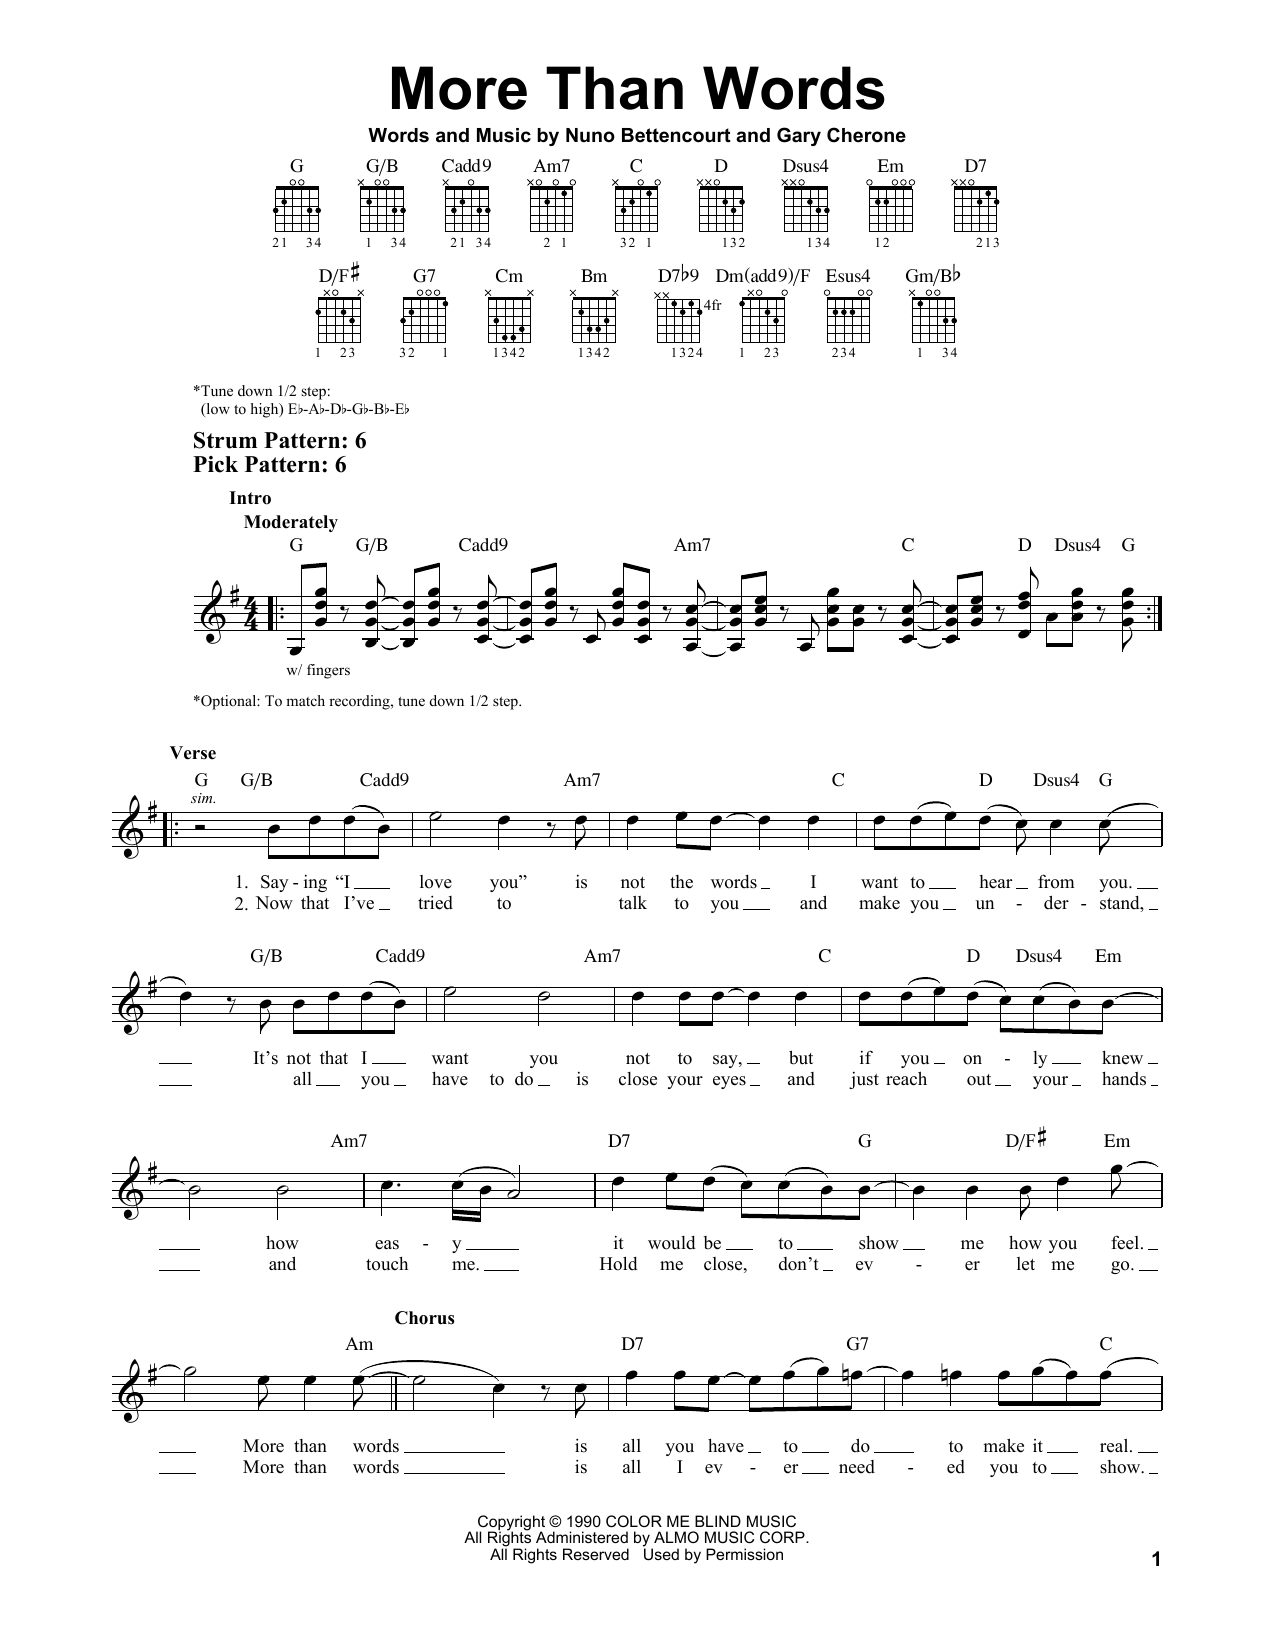 Download Extreme More Than Words Sheet Music